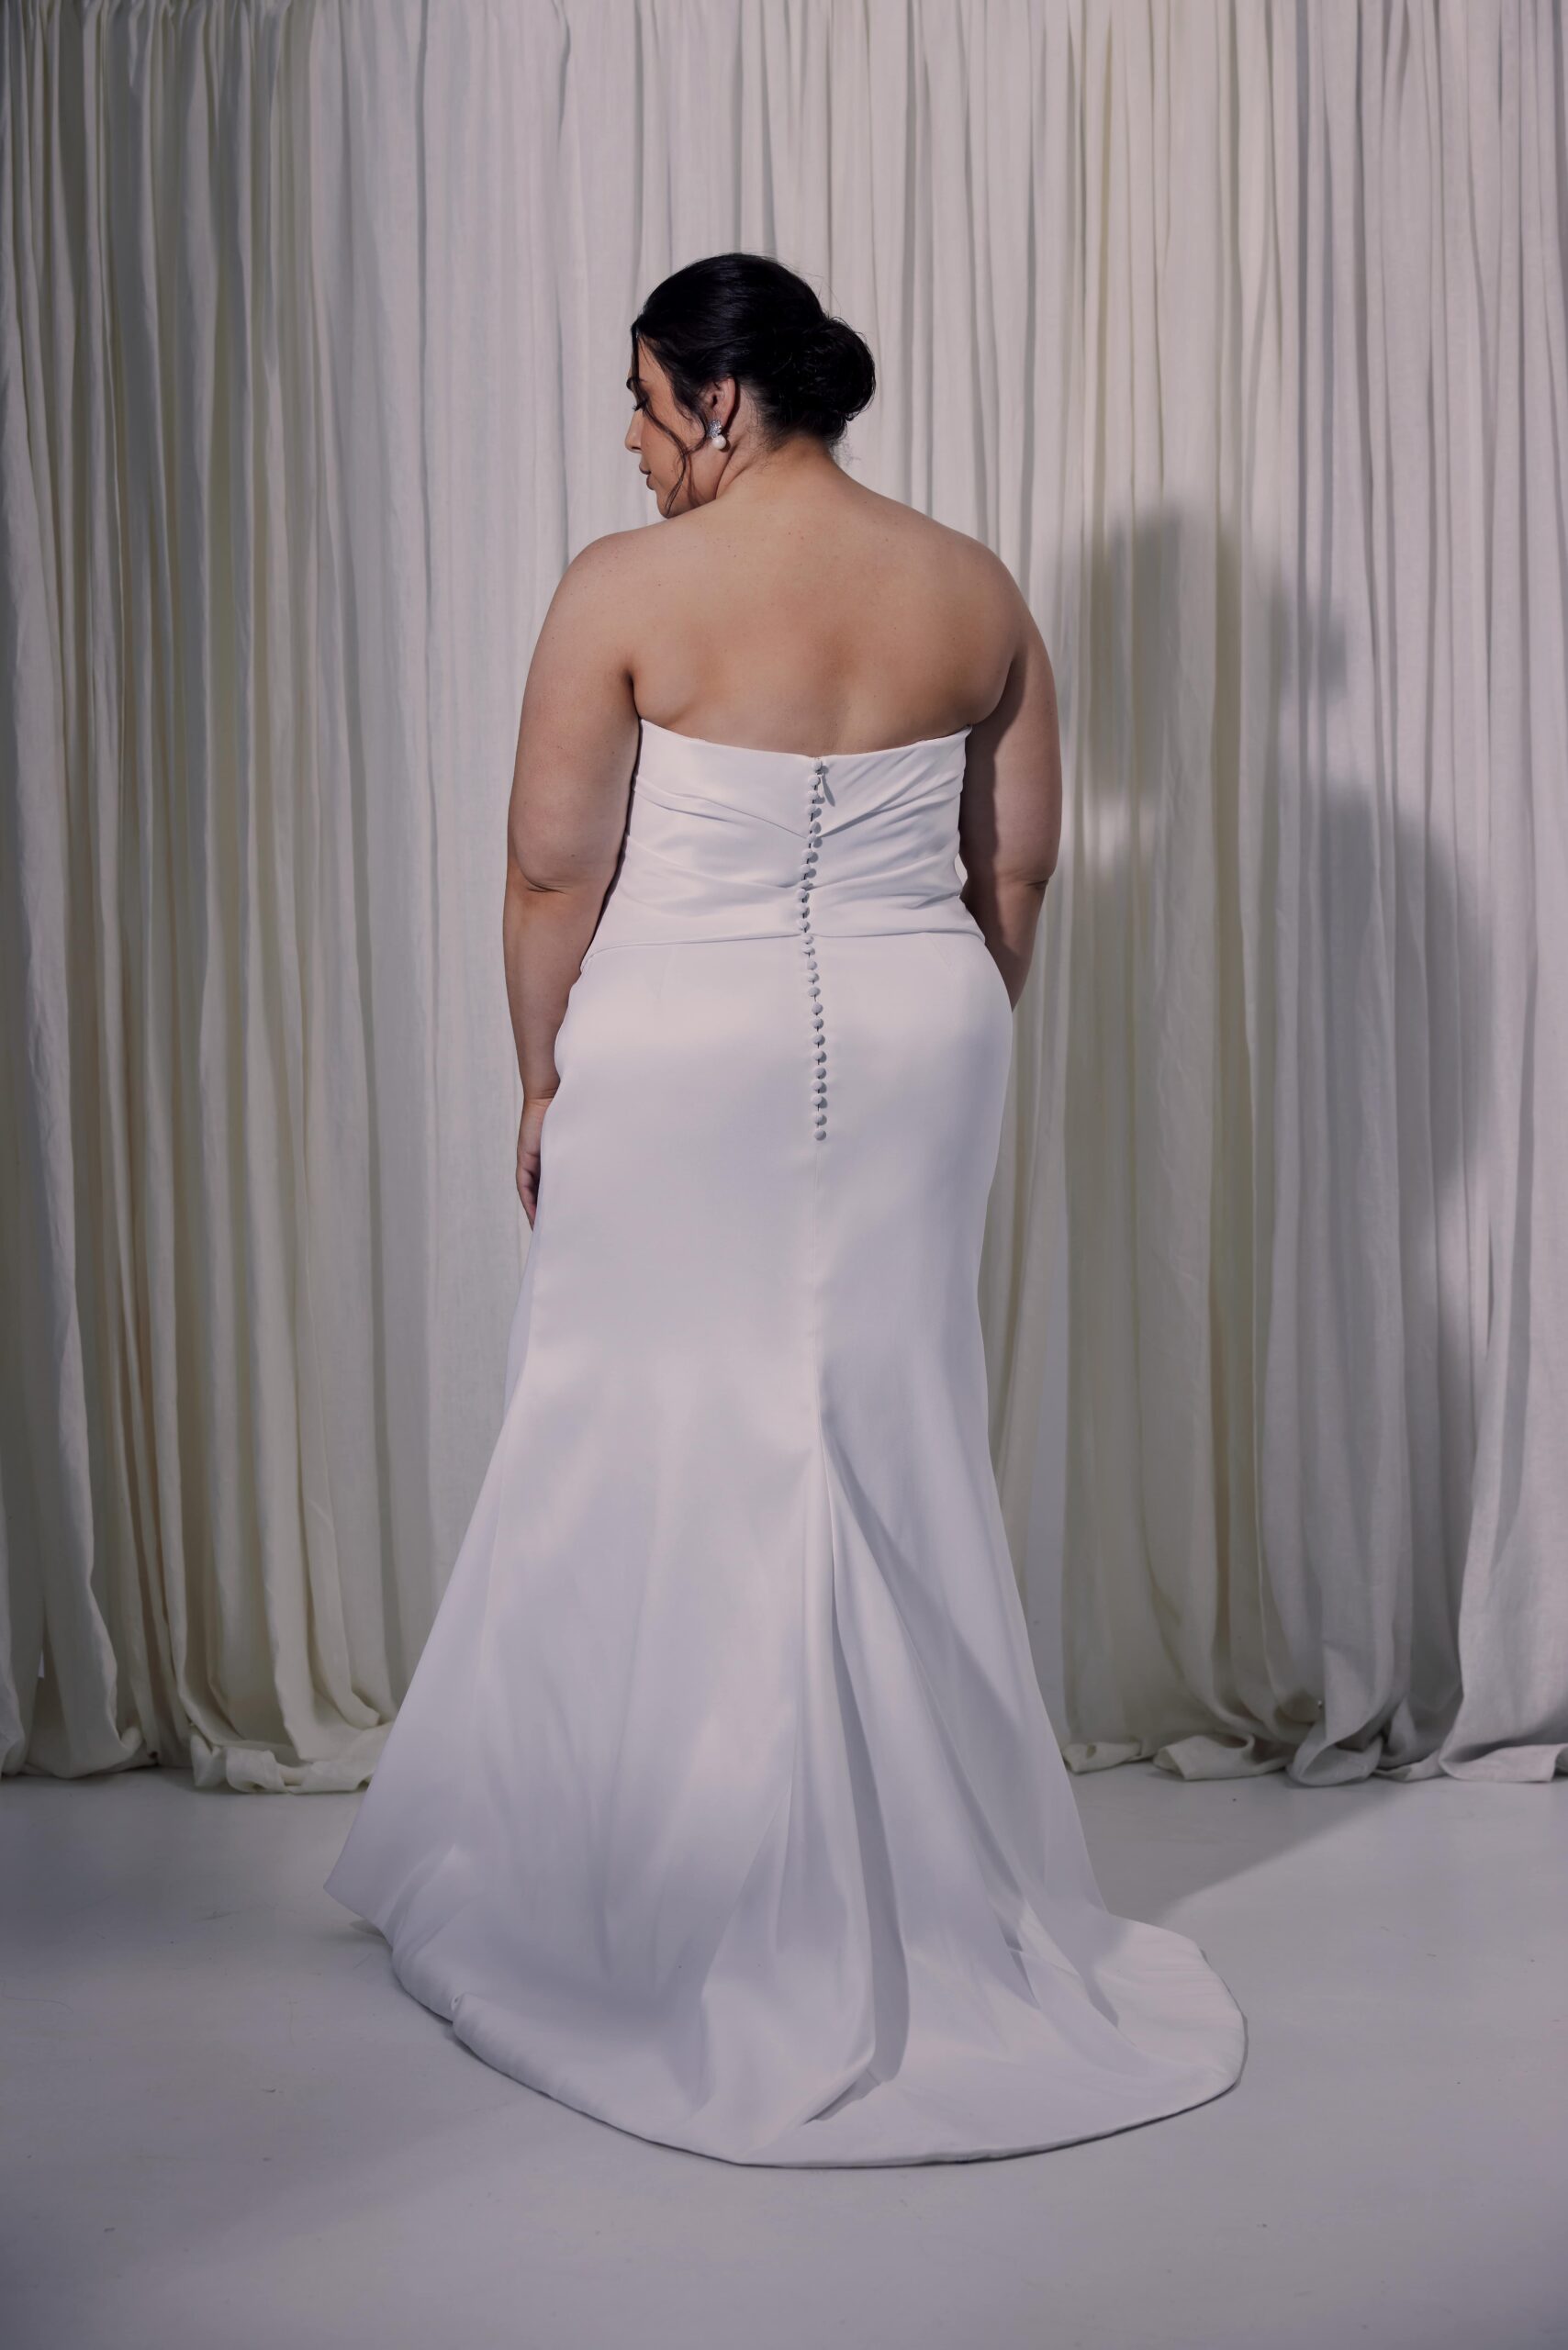 The Caroline gown - a fitted gown with draping, scoop neckline and a side split.